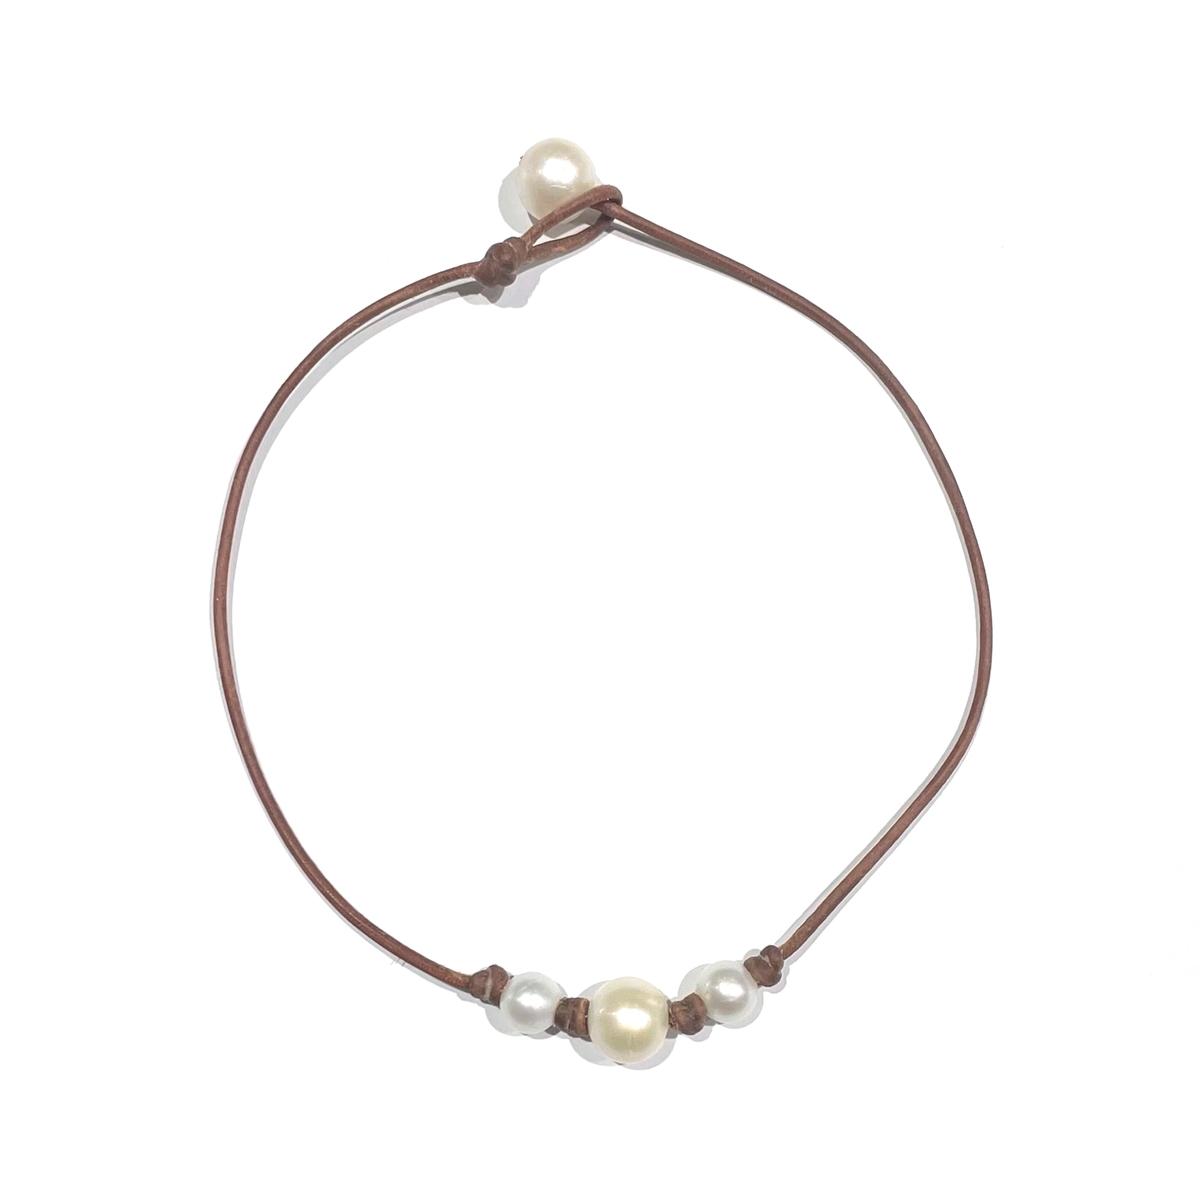 3 White Freshwater Pearl and Leather Necklace